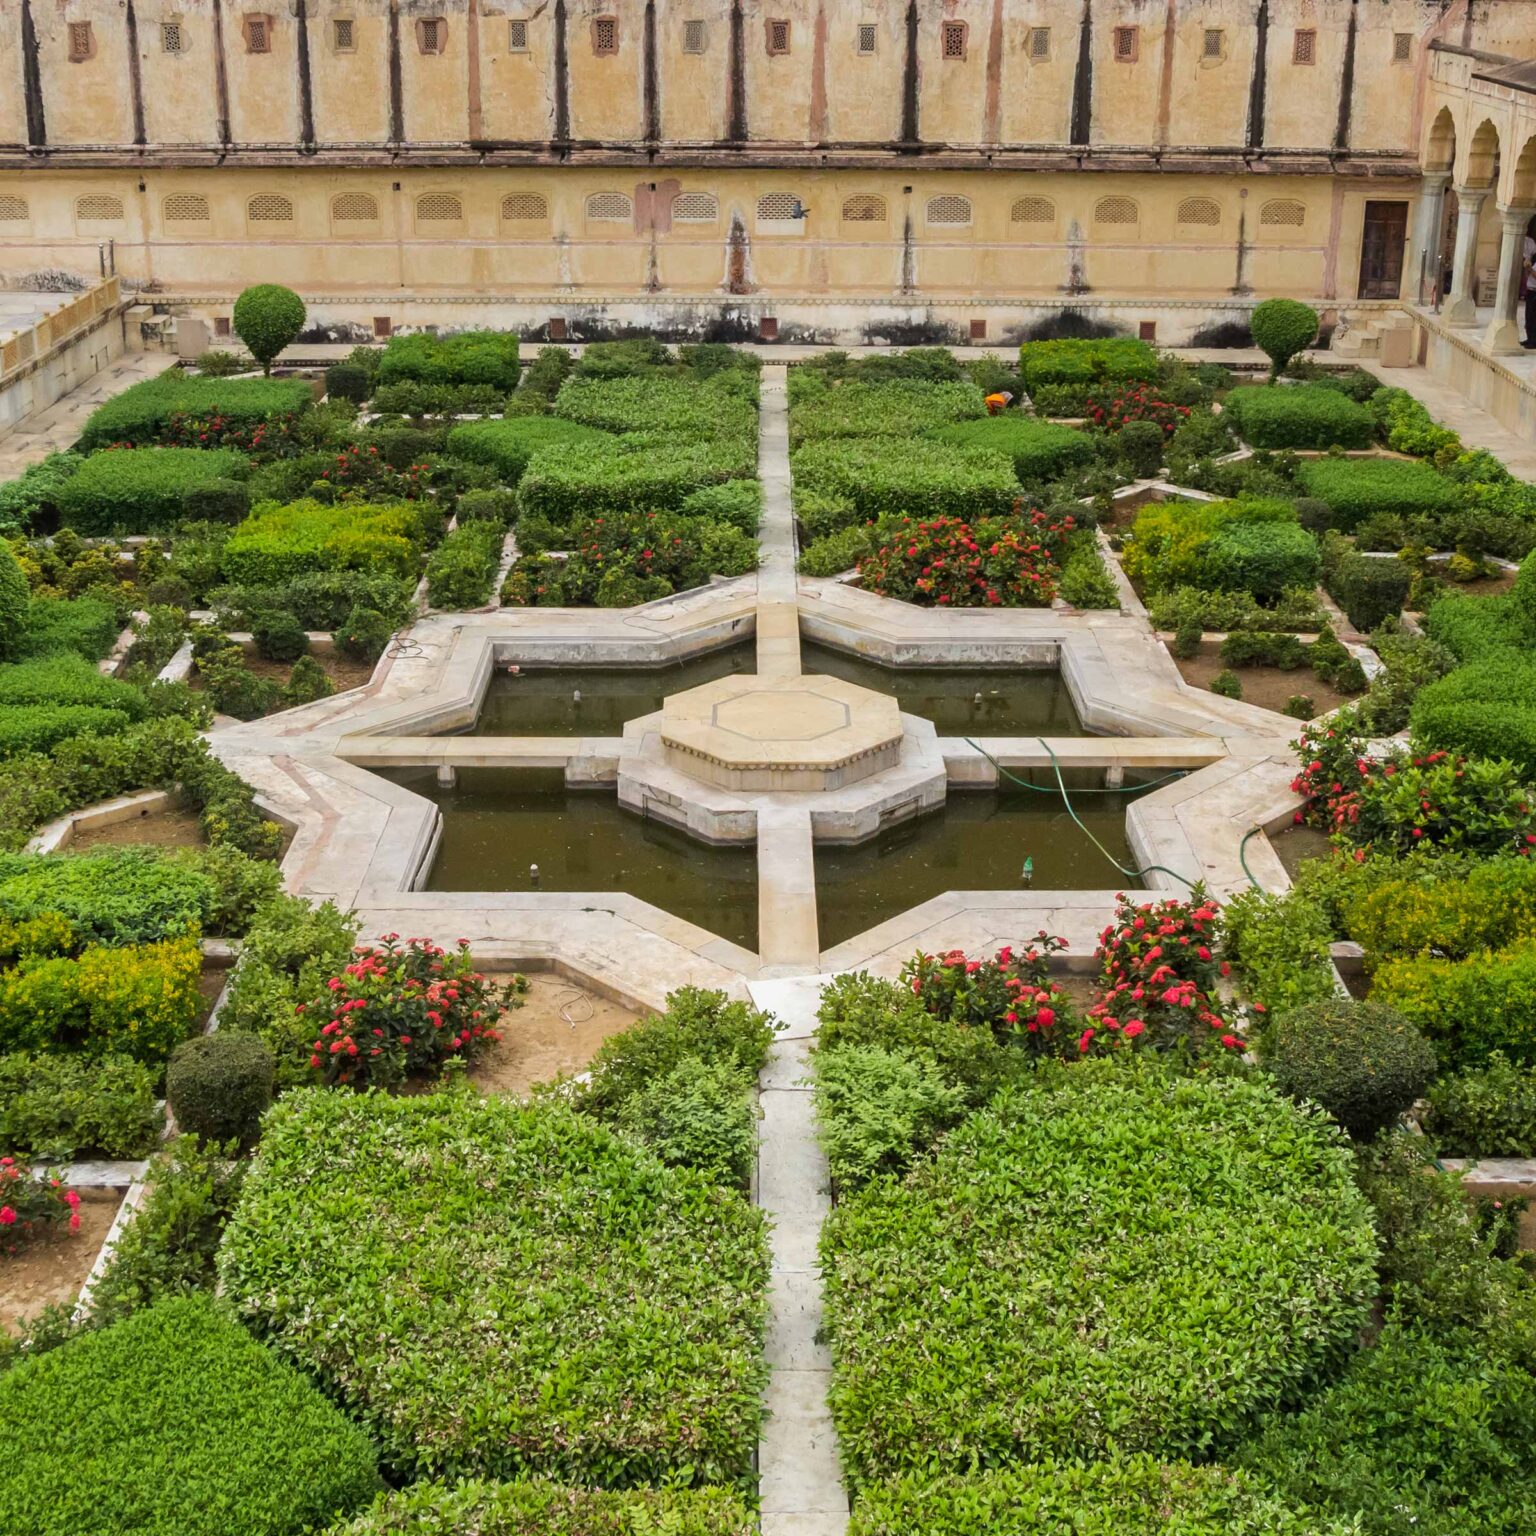 Formal Garden - Central Courtyard of the Amer Fort in Jaipur, India